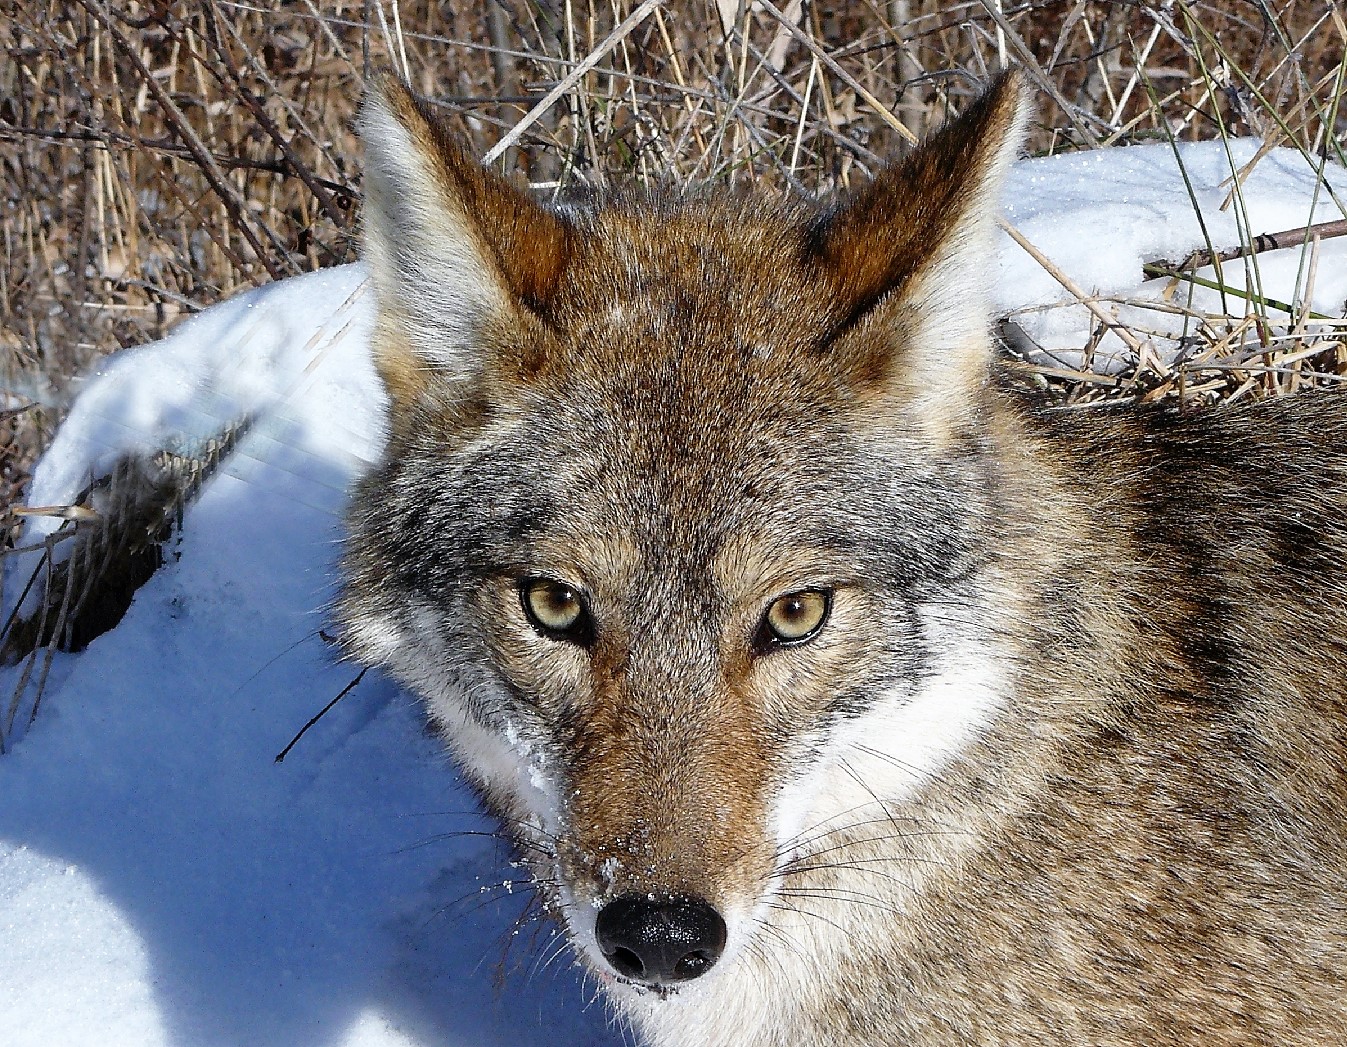 How to Protect your Property from Coyotes